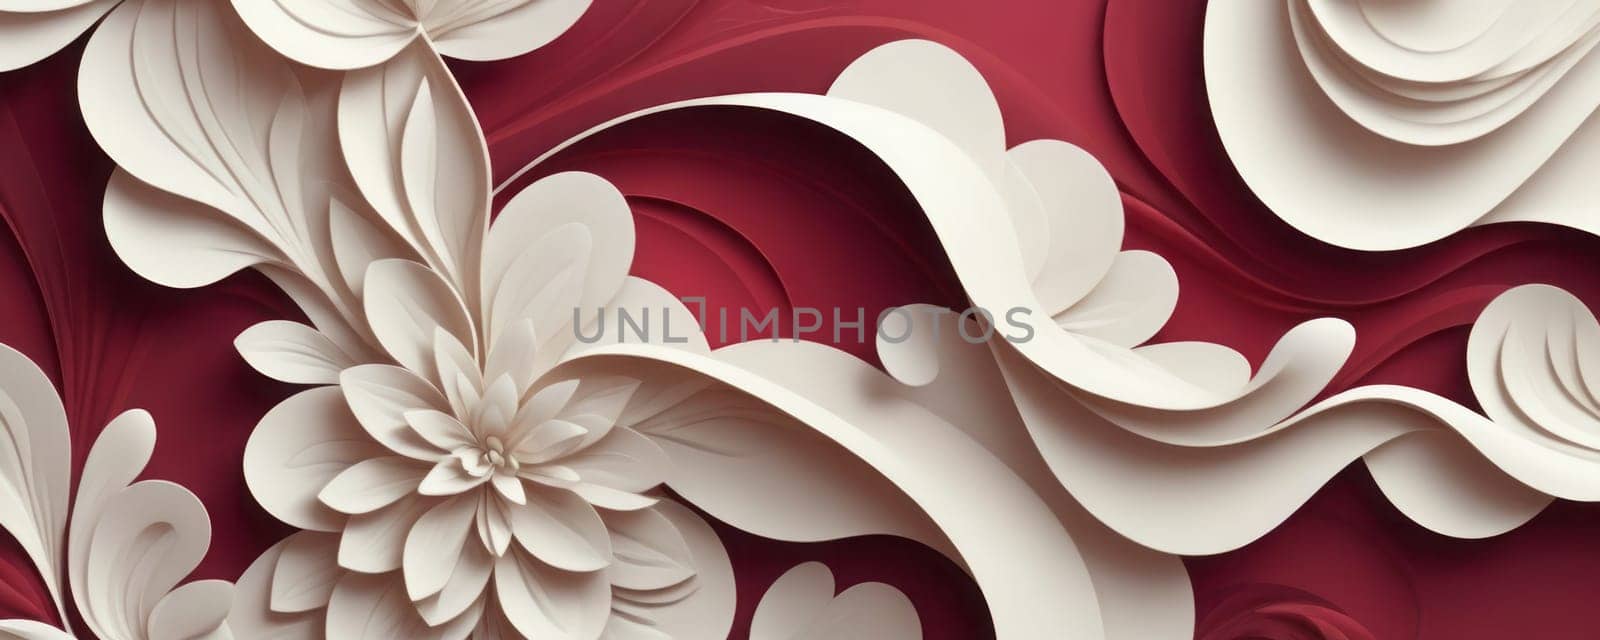 Sculpted Shapes in Maroon and Floral white by nkotlyar